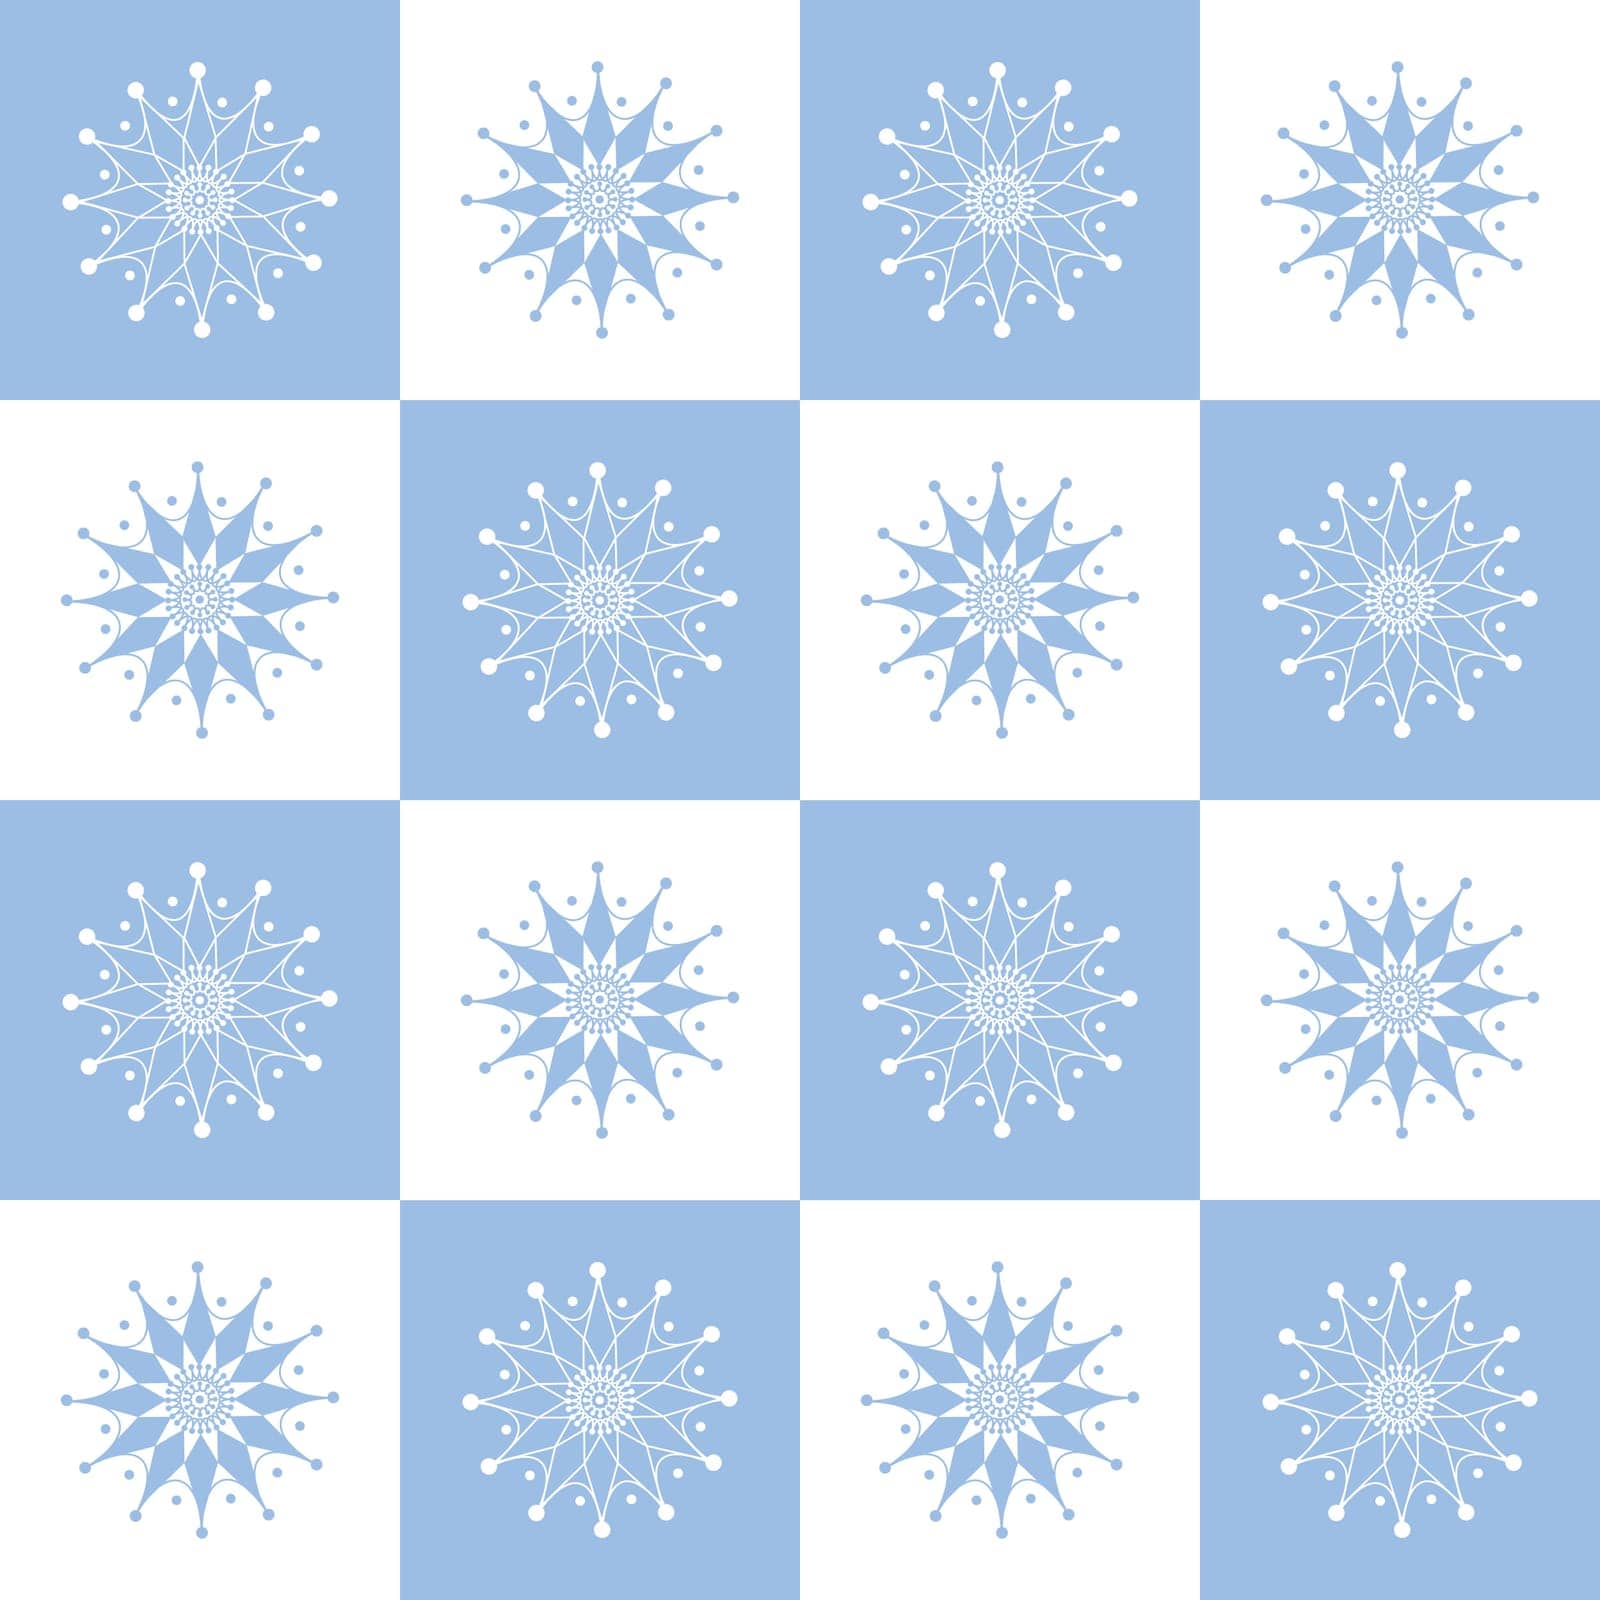 Snowflakes in diamonds pattern. Seamless pattern with the image of snowflakes arranged in geometric shapes. Winter Christmas snow pattern on a blue background. Vector by NastyaN